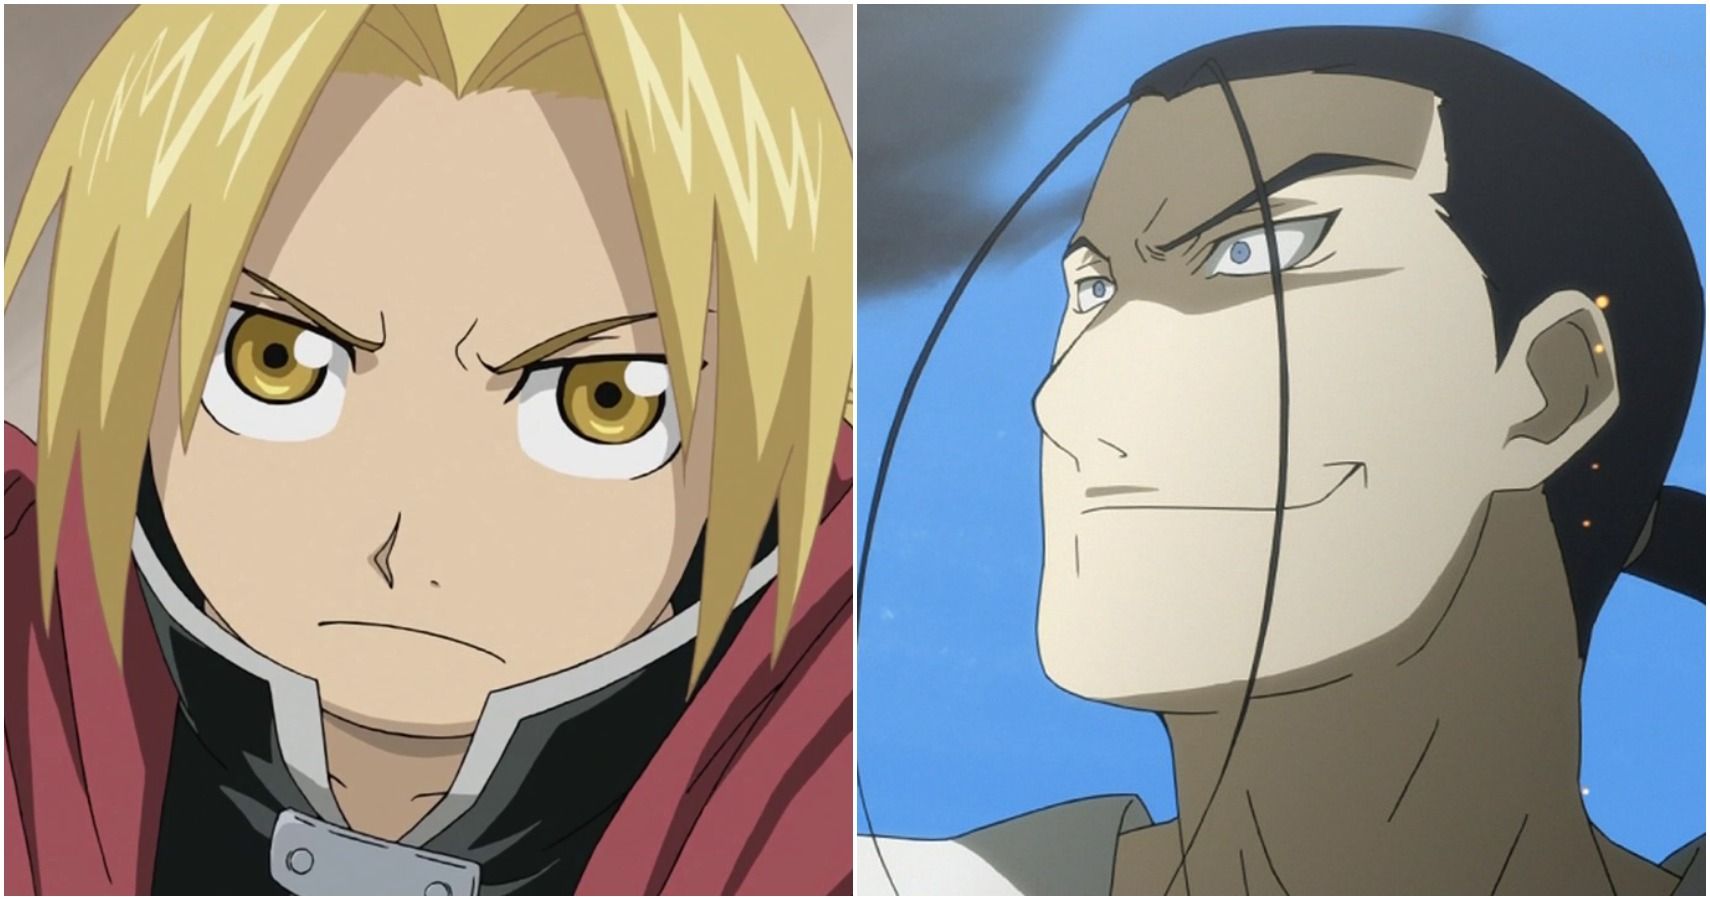 Fullmetal Alchemist: The 10 Most Likable Characters, Ranked